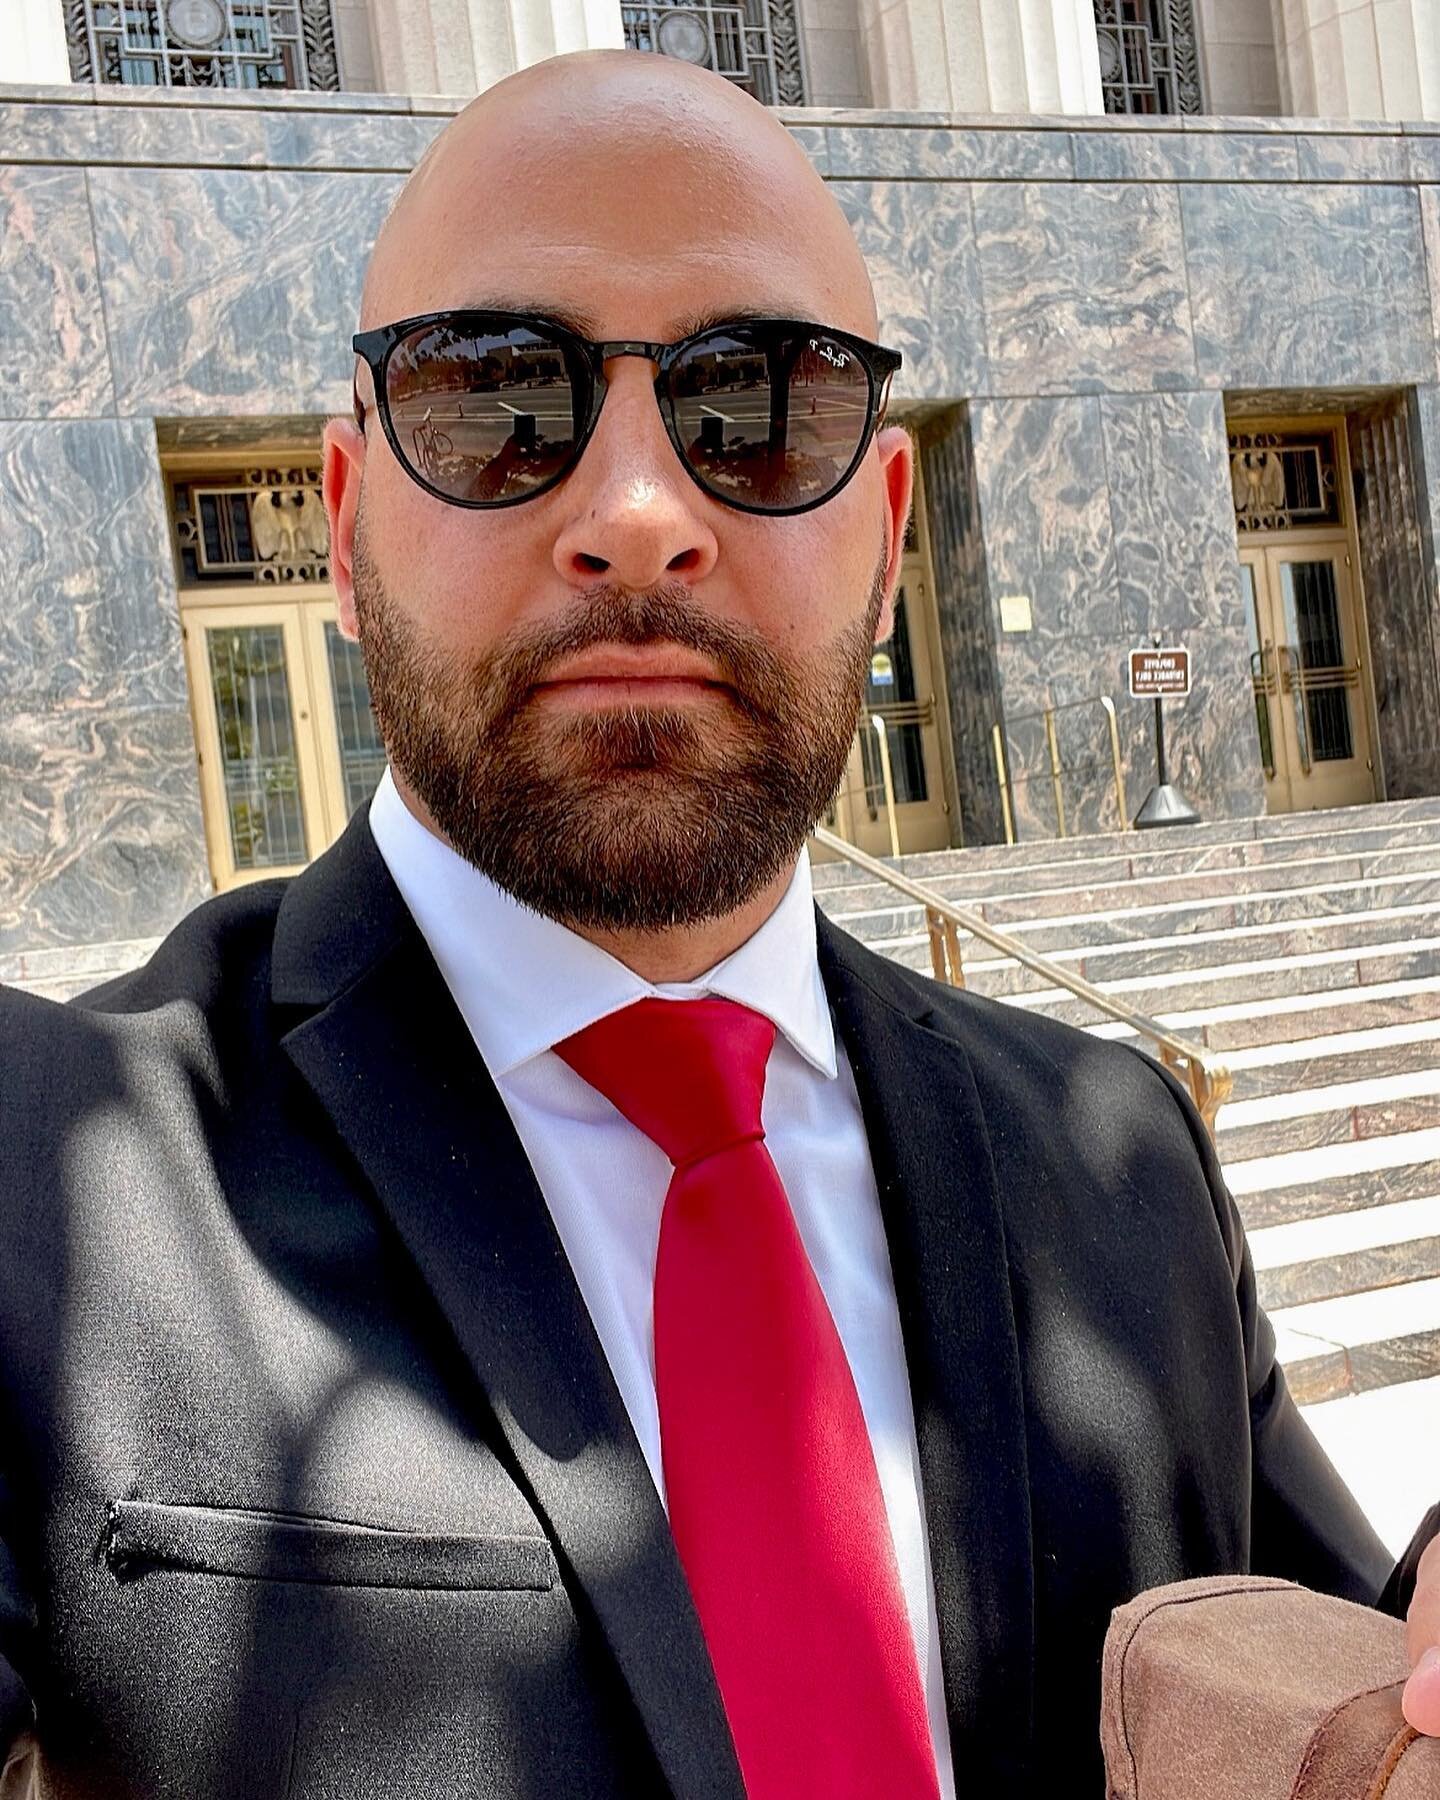 Back to in-person court appearances in Downtown, LA 📍

Inspired look: The Hitman (to send intimidating vibes for a favorable ruling 🤵&zwj;♂️🩸) #itdidntwork

#personalinjurylawyer #law #injurylaw #personalinjury #attorney #lawyer #lawyerlife #bever